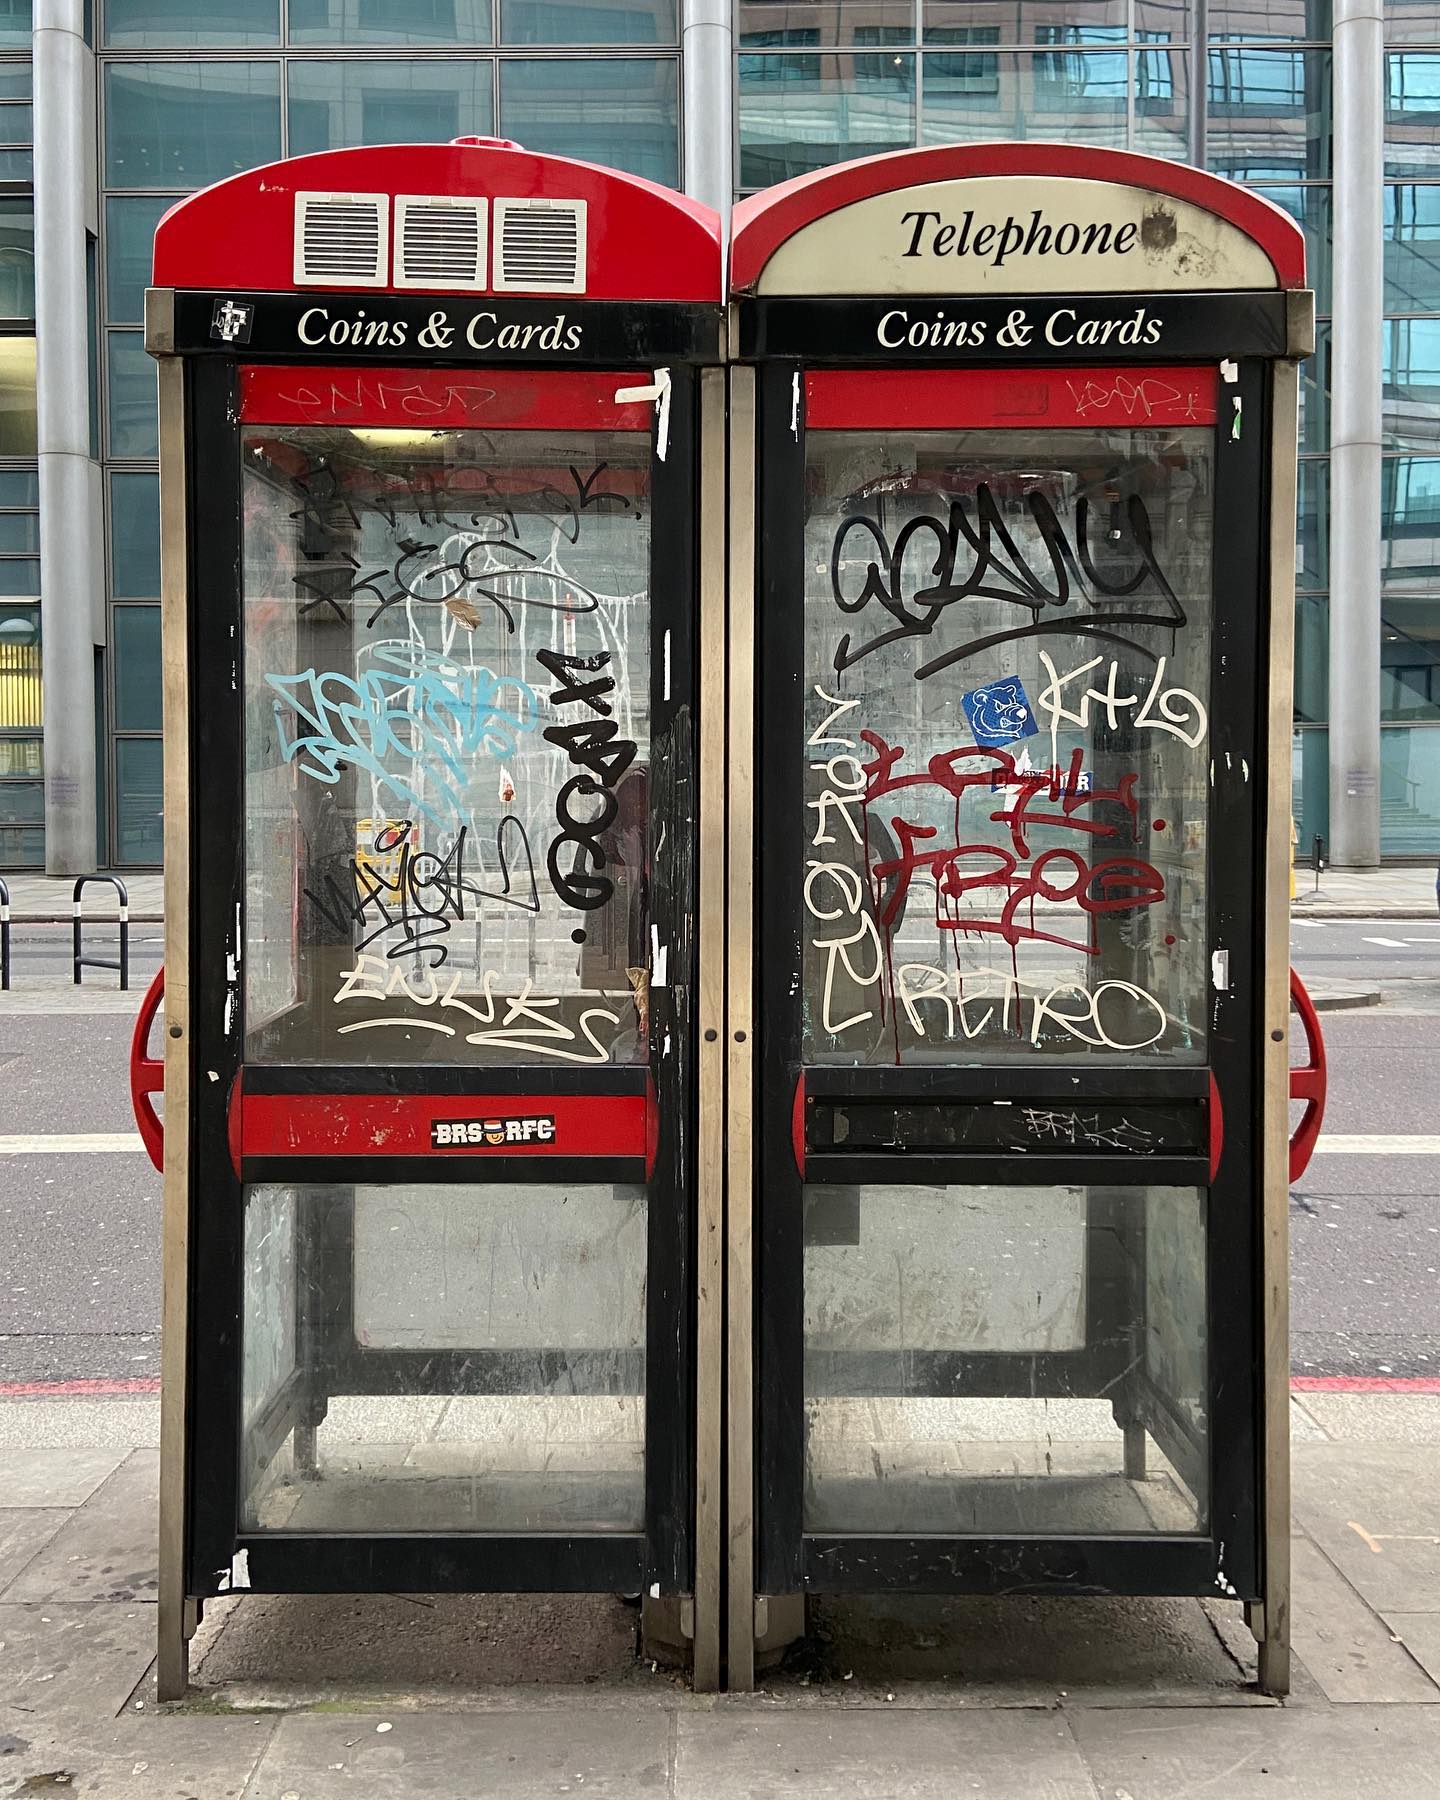 twin phone booths boasting coins & cards